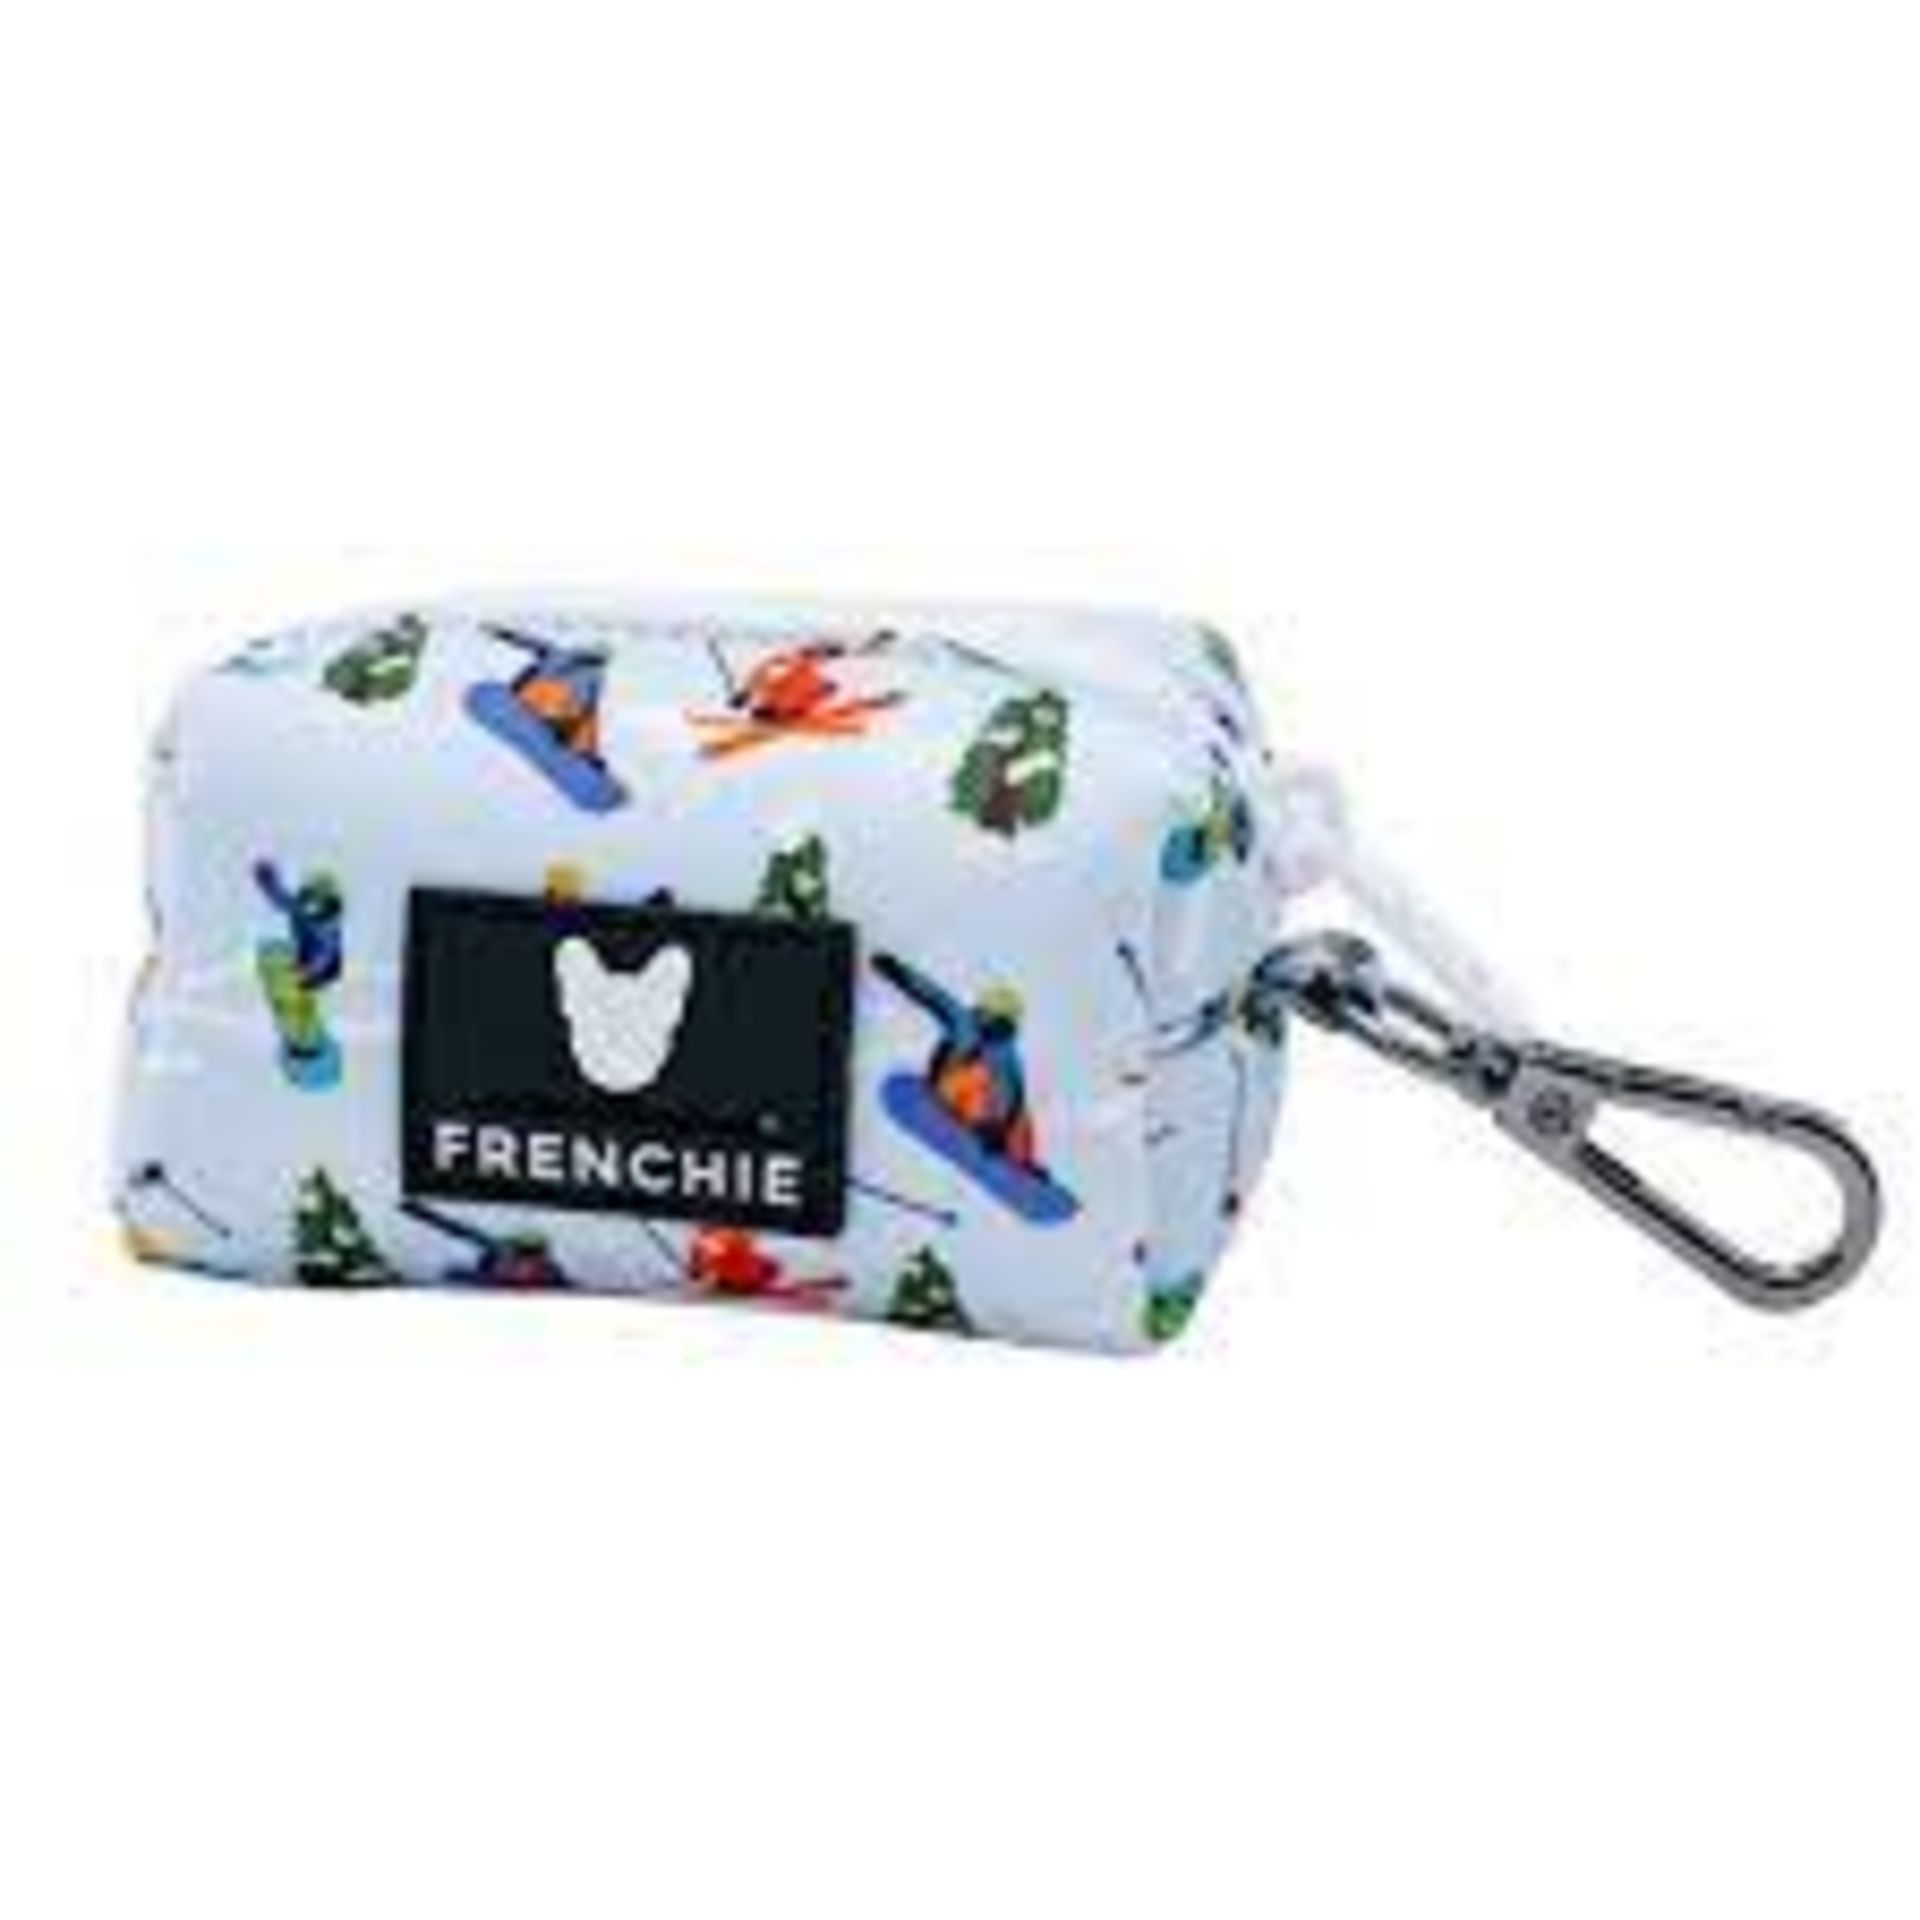 Trade Lot 100 X New .Packaged Frenchie The Bulldog Luxury Branded Dog Products. May include items - Image 6 of 50